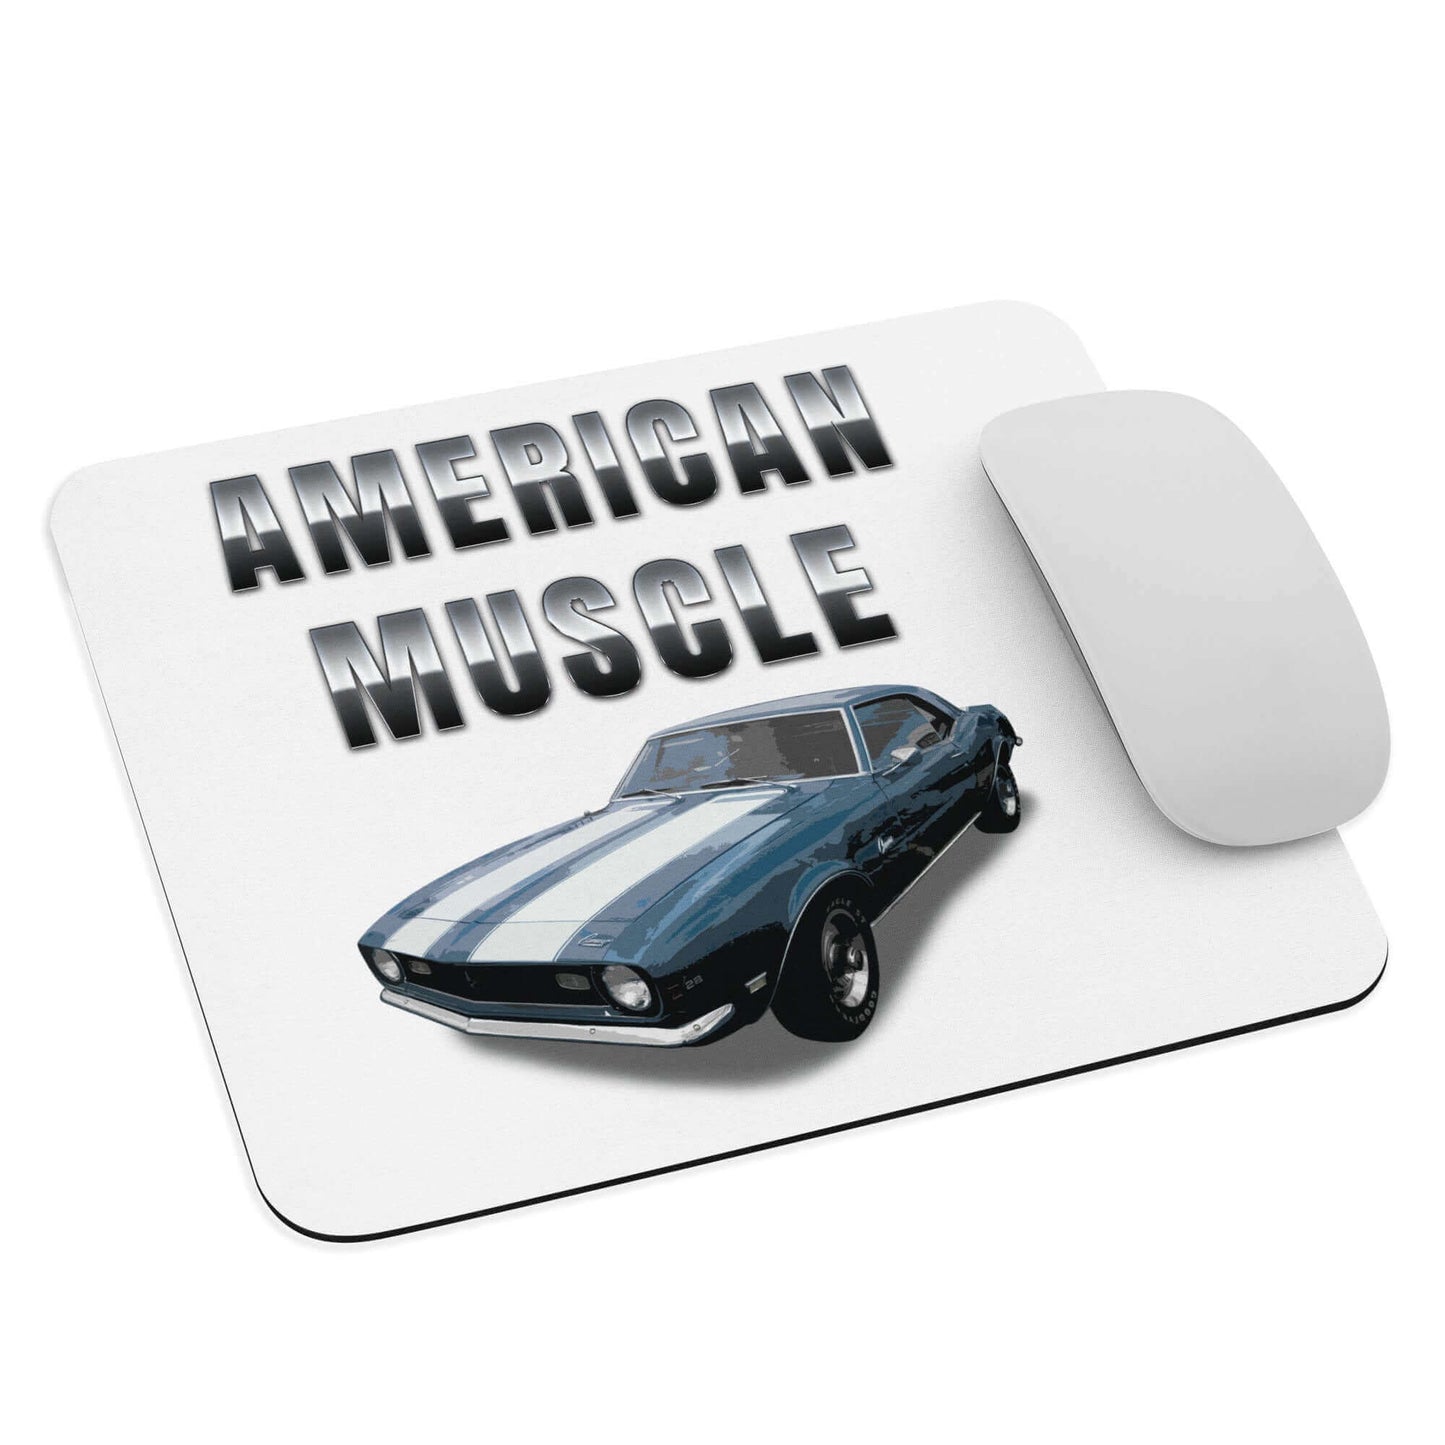 American Muscle - 1969 Chevy Camaro - Mouse pad - Horrible Designs